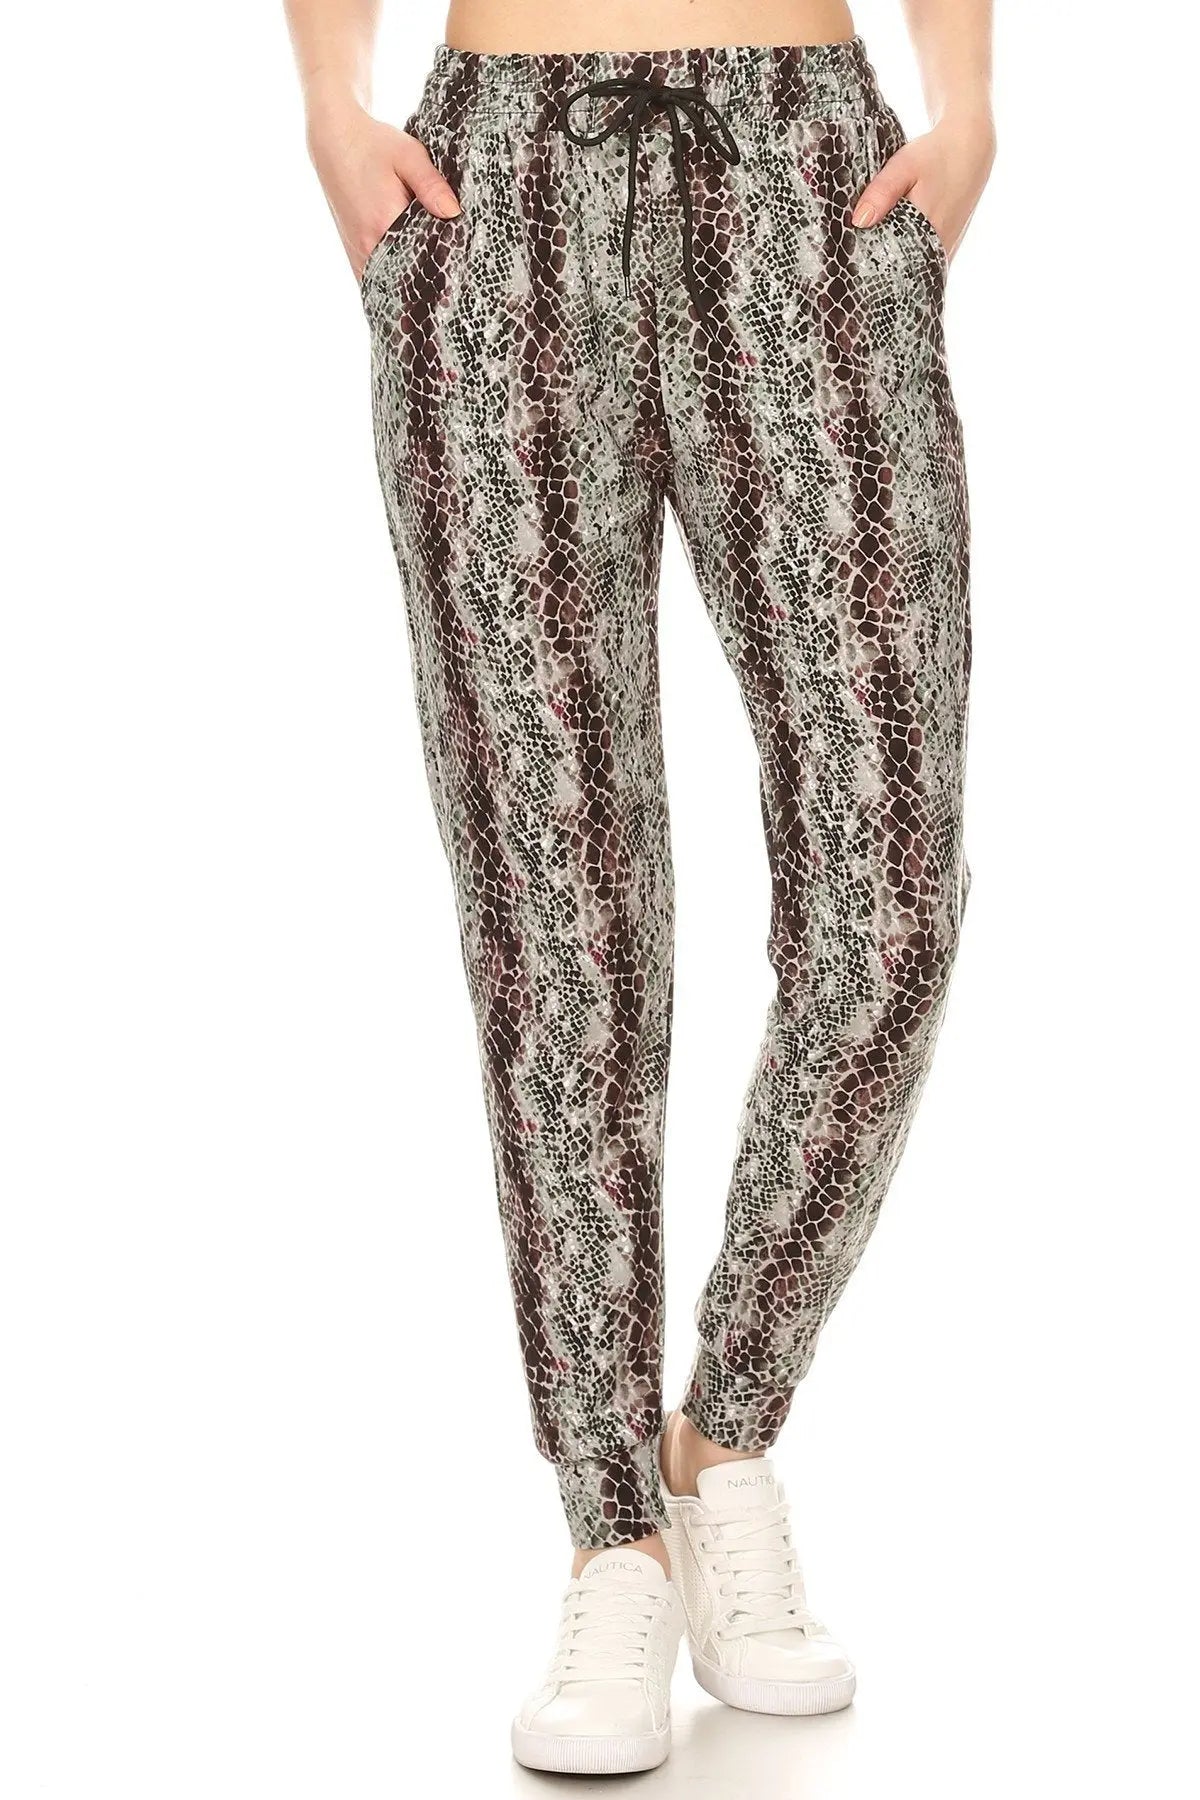 Snakeskin Printed Joggers With Solid Trim, Drawstring Waistband, Waist Sunny EvE Fashion